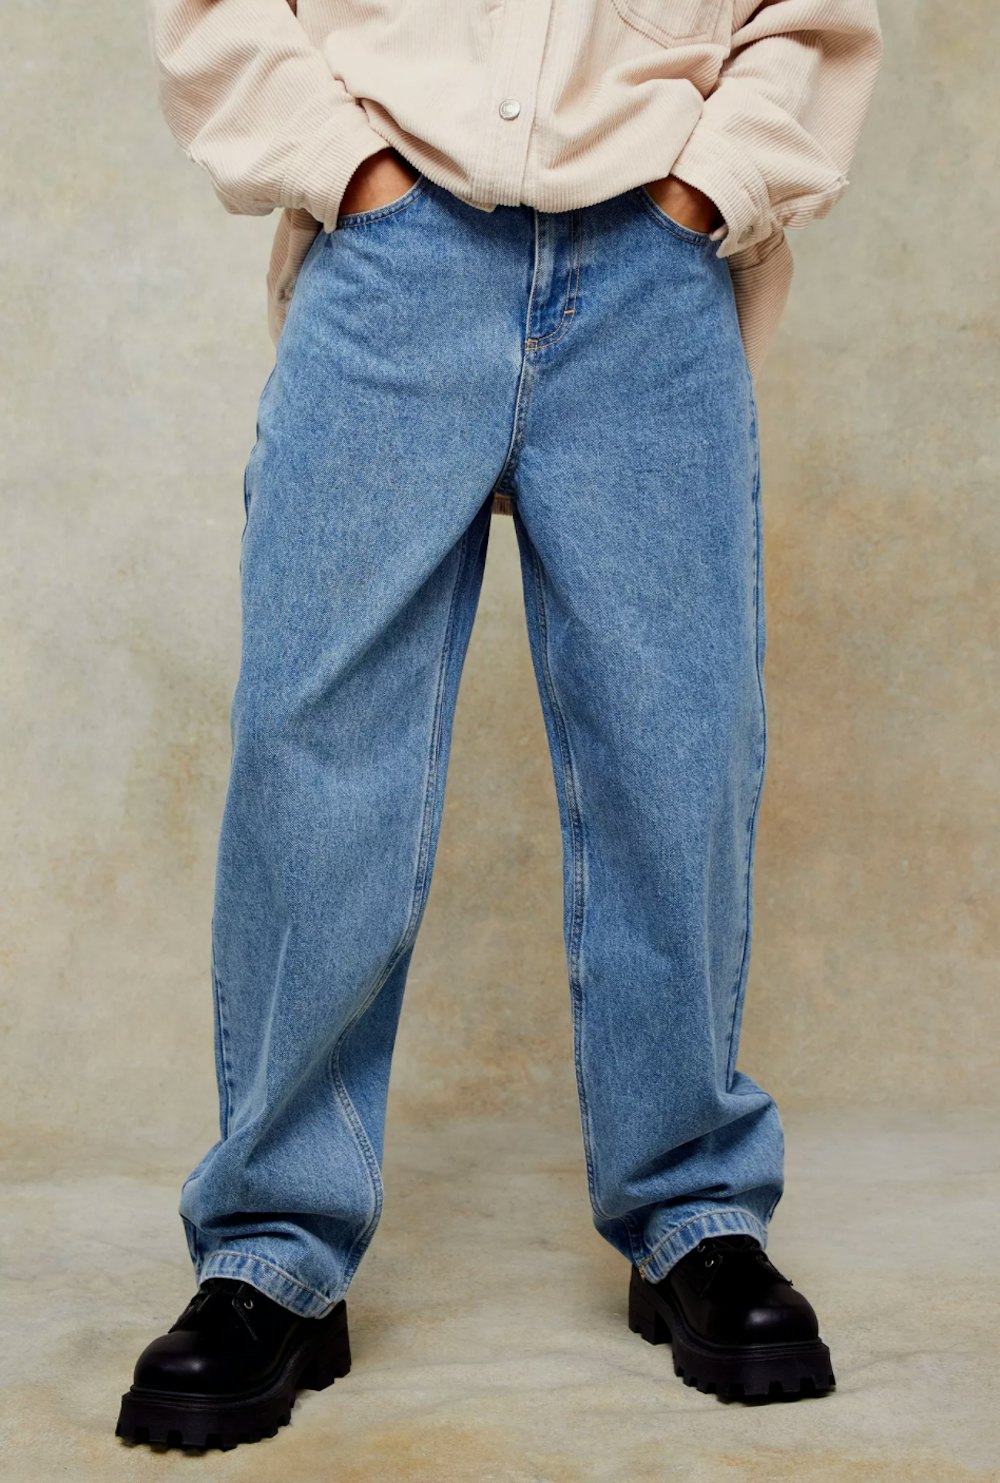 baggy shiny jeans